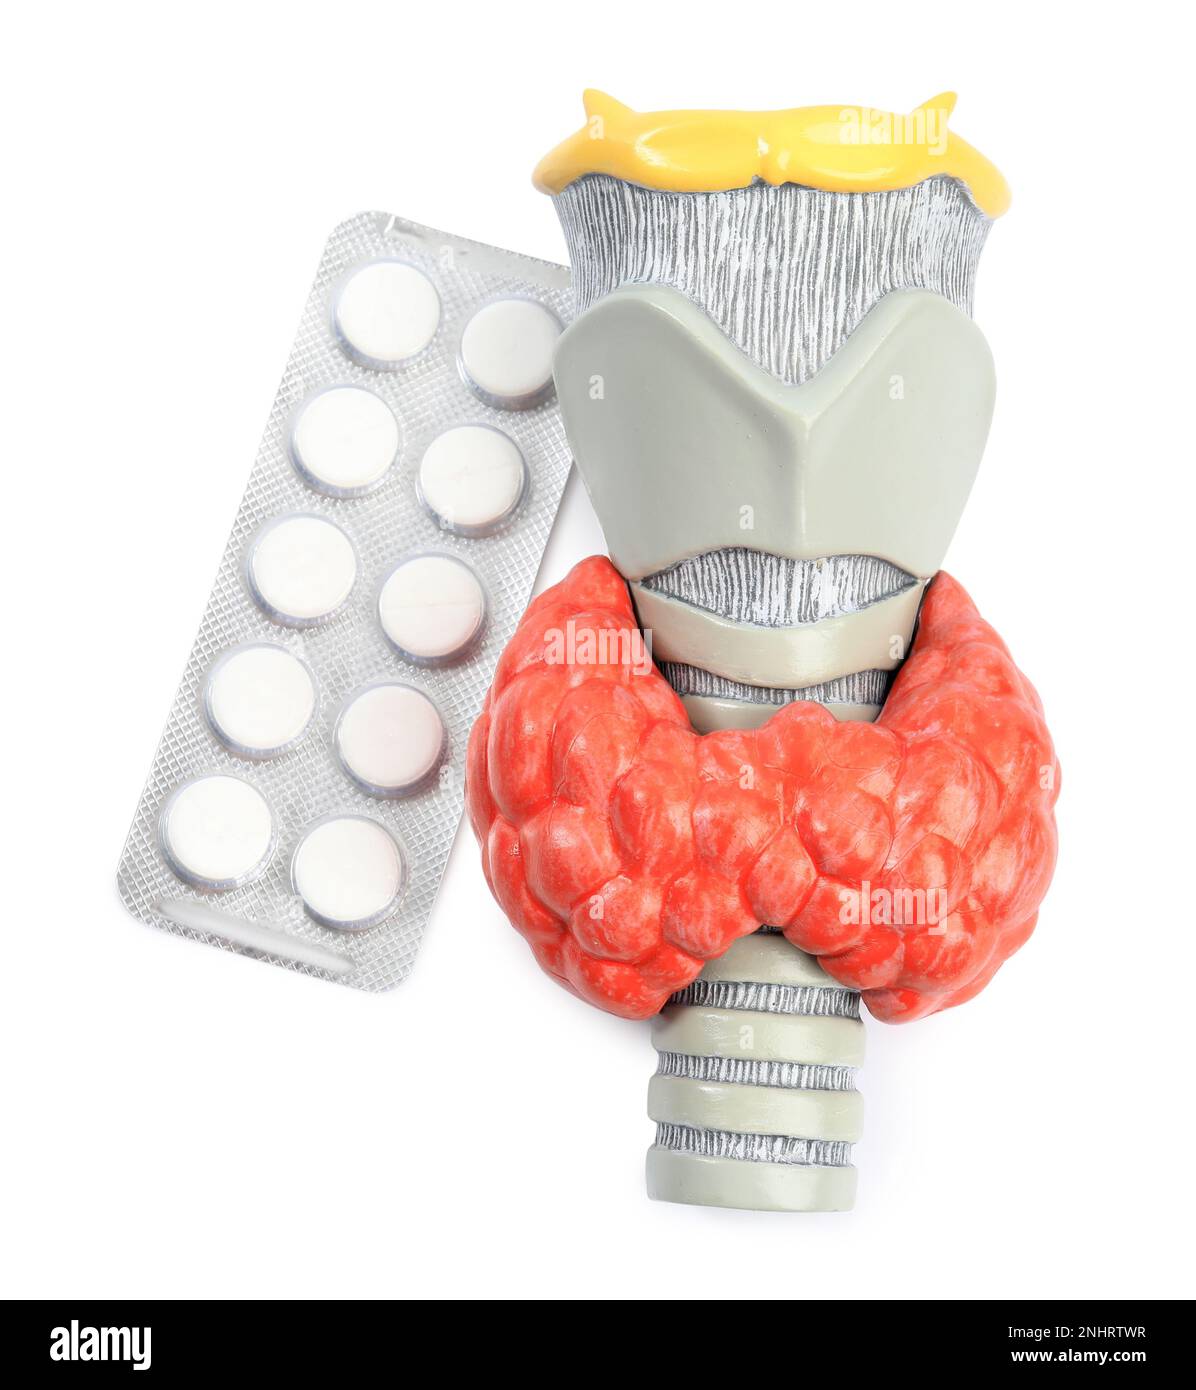 Plastic model of afflicted thyroid and pills on white background, top view Stock Photo